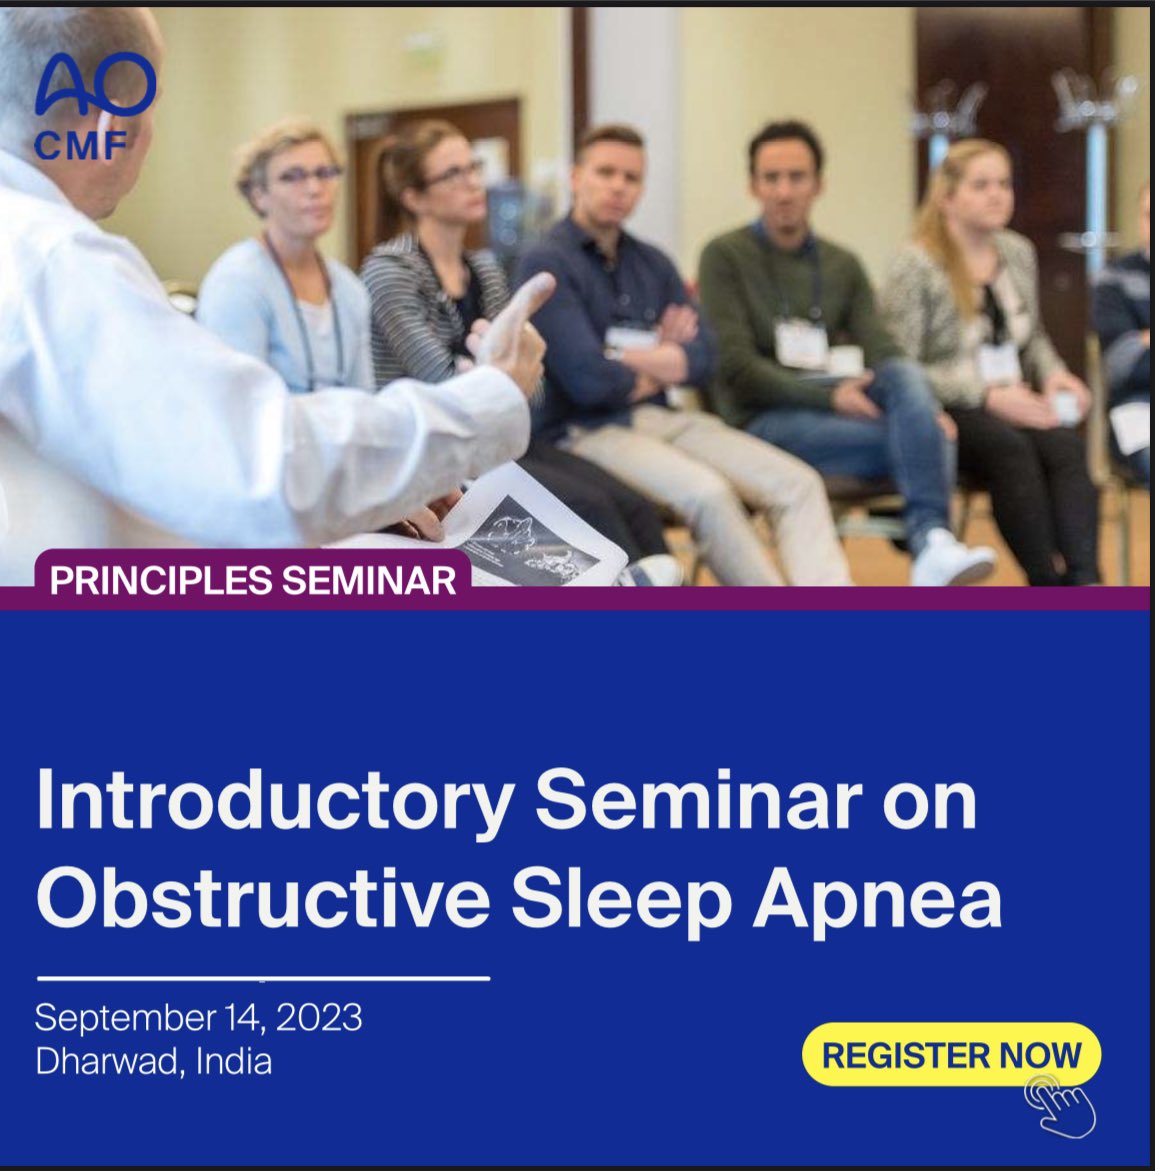 Inviting colleagues across specialities to the AO CMF *Introductory Seminar on Obstructive Sleep Apnea*. at the SDM College of Dental Sciences & Hospital, Dharwad, India on the 14th September 2023. #obstructivesleepapnea 
aofoundation.force.com/s/lt-event?id=…